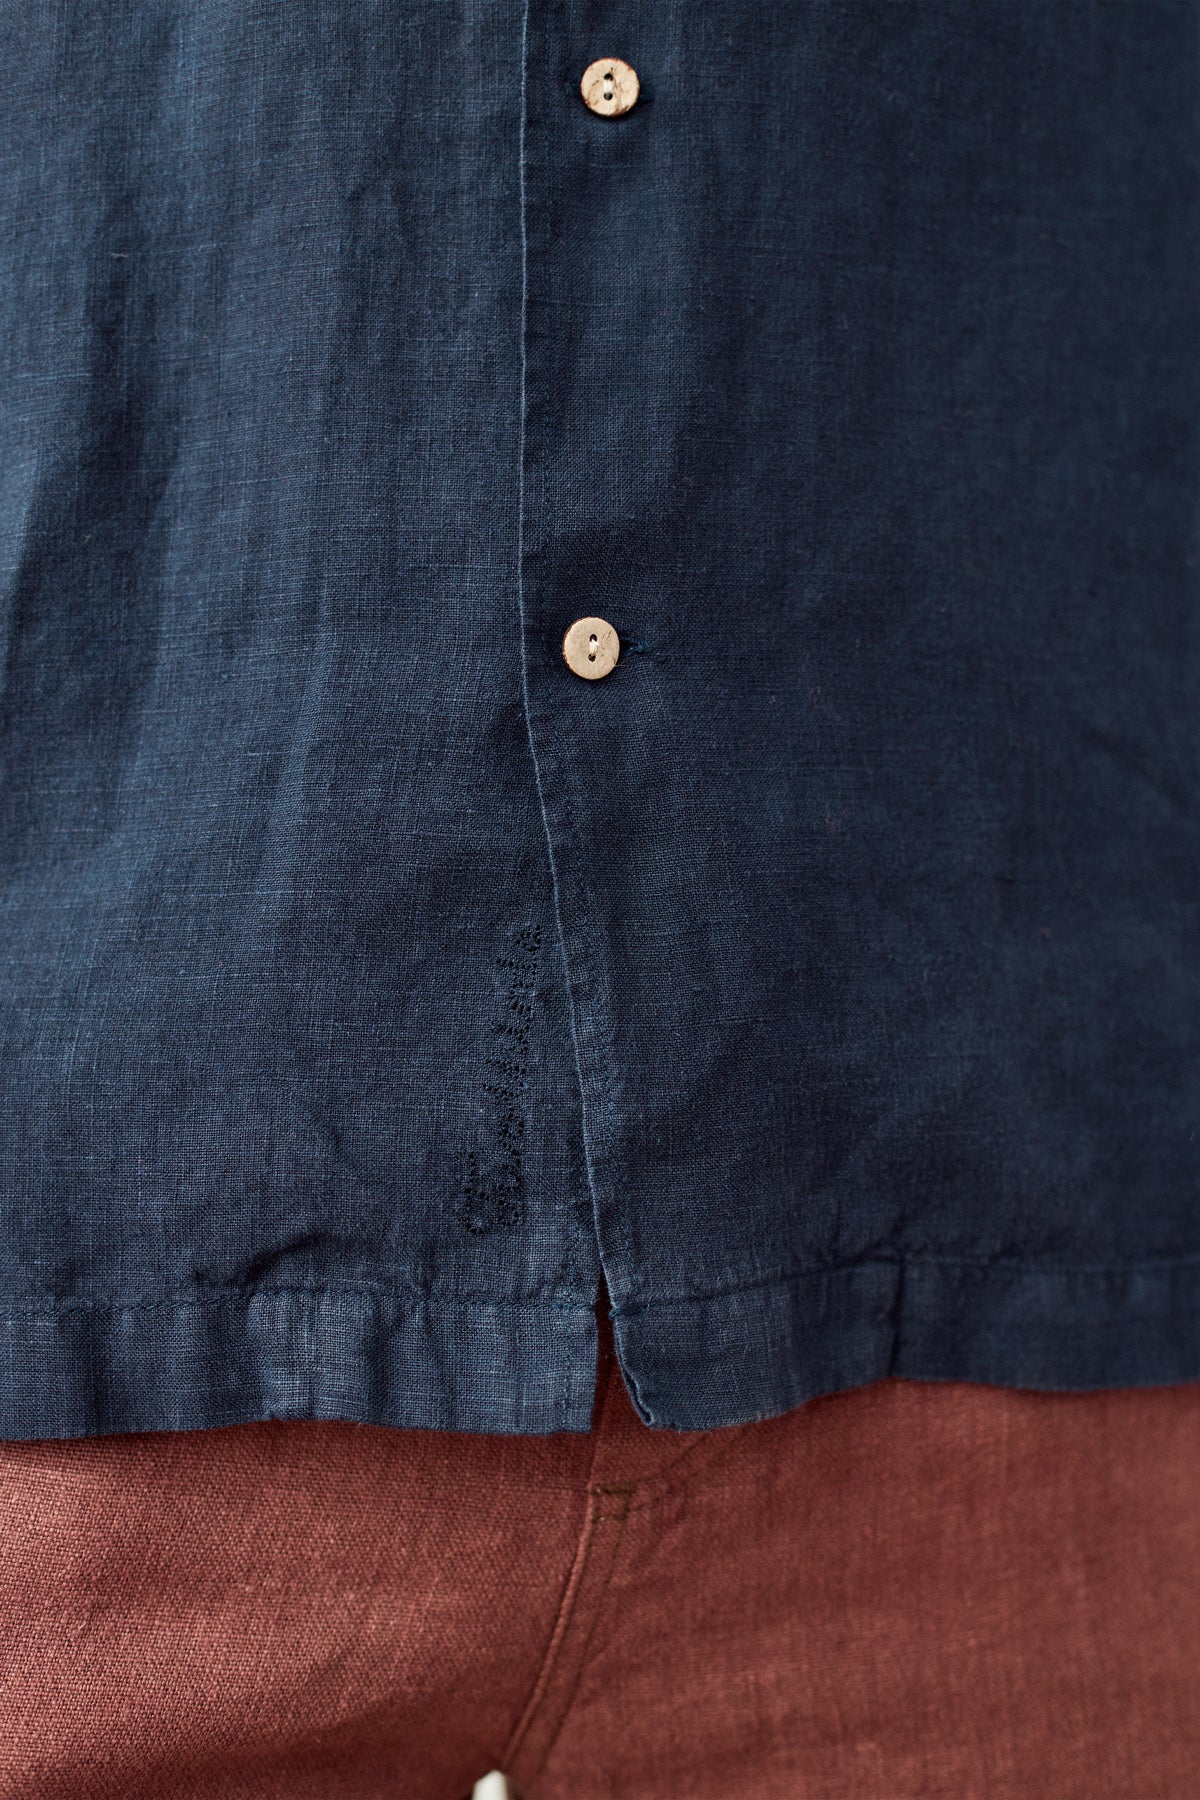 TWOTHIRDS sustainable linen shirt